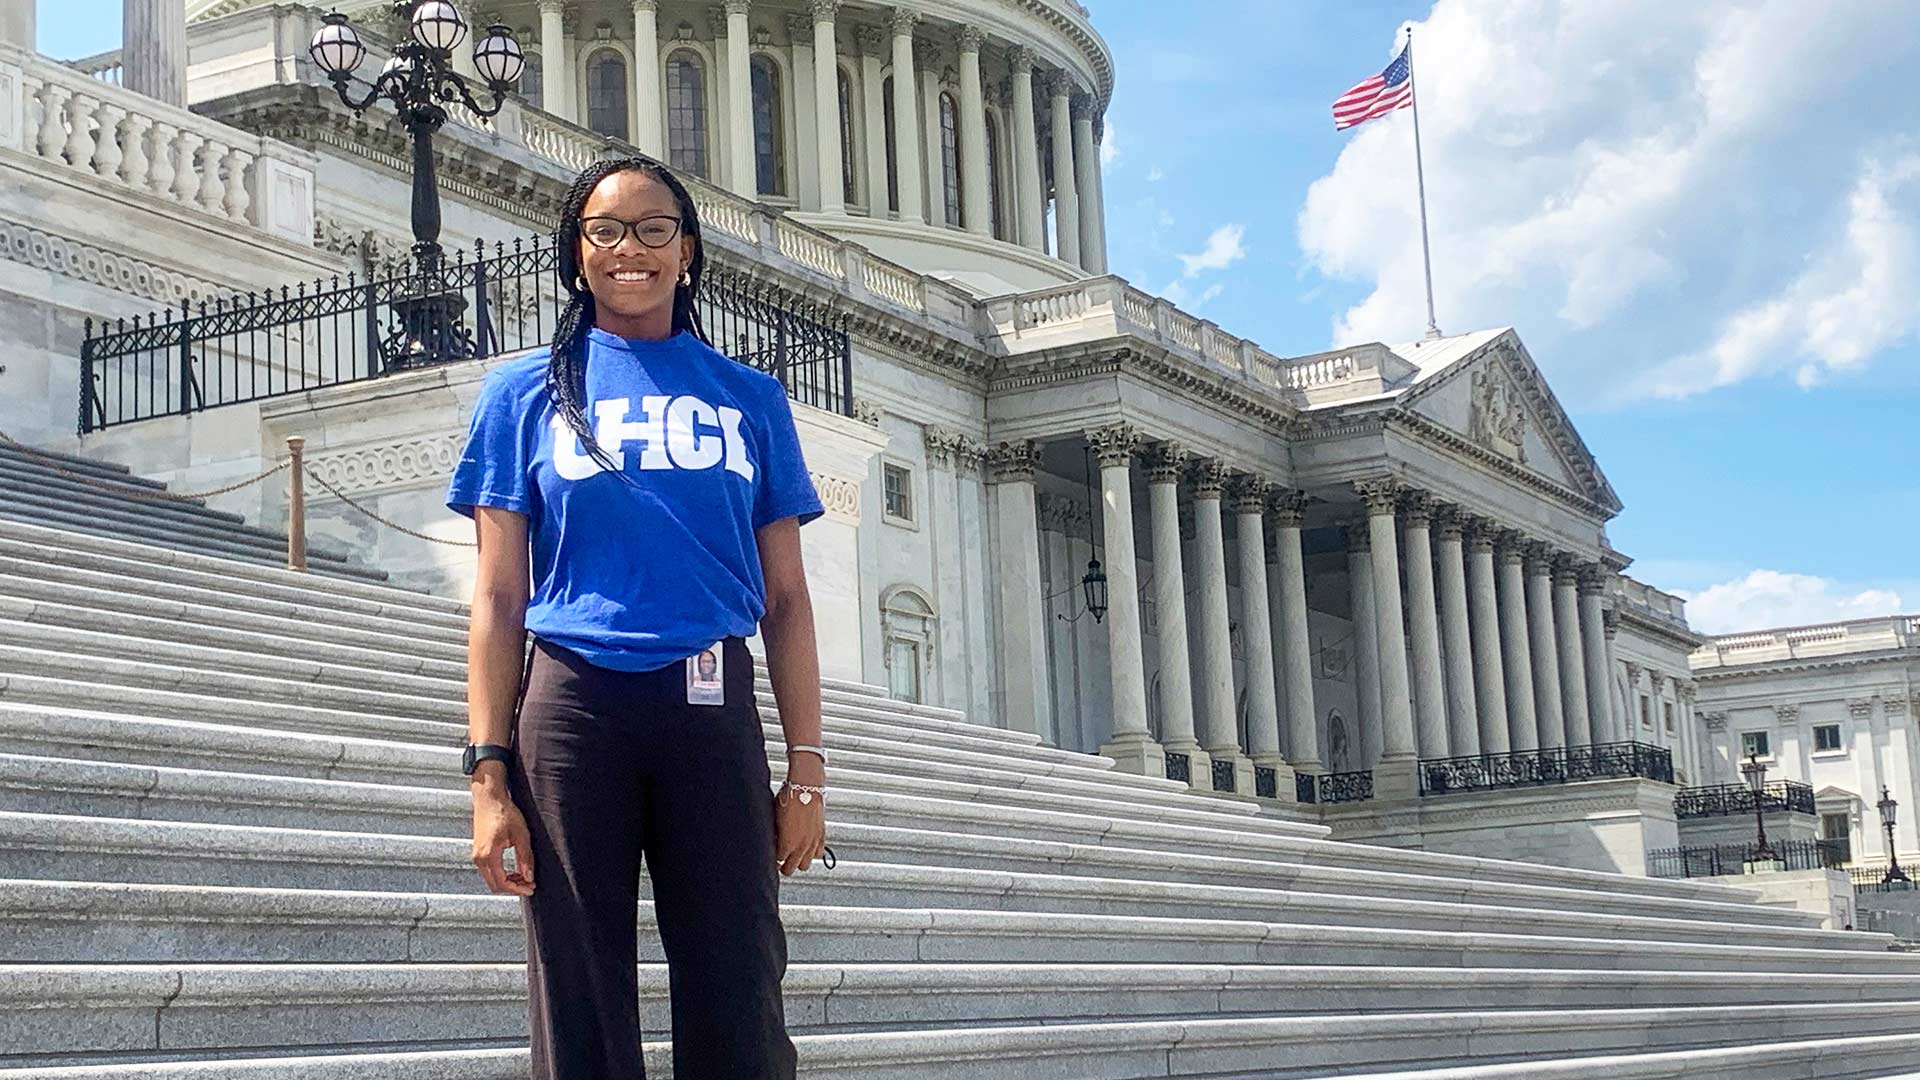 Congressional Black Caucus Foundation intern credits student org with opening doors